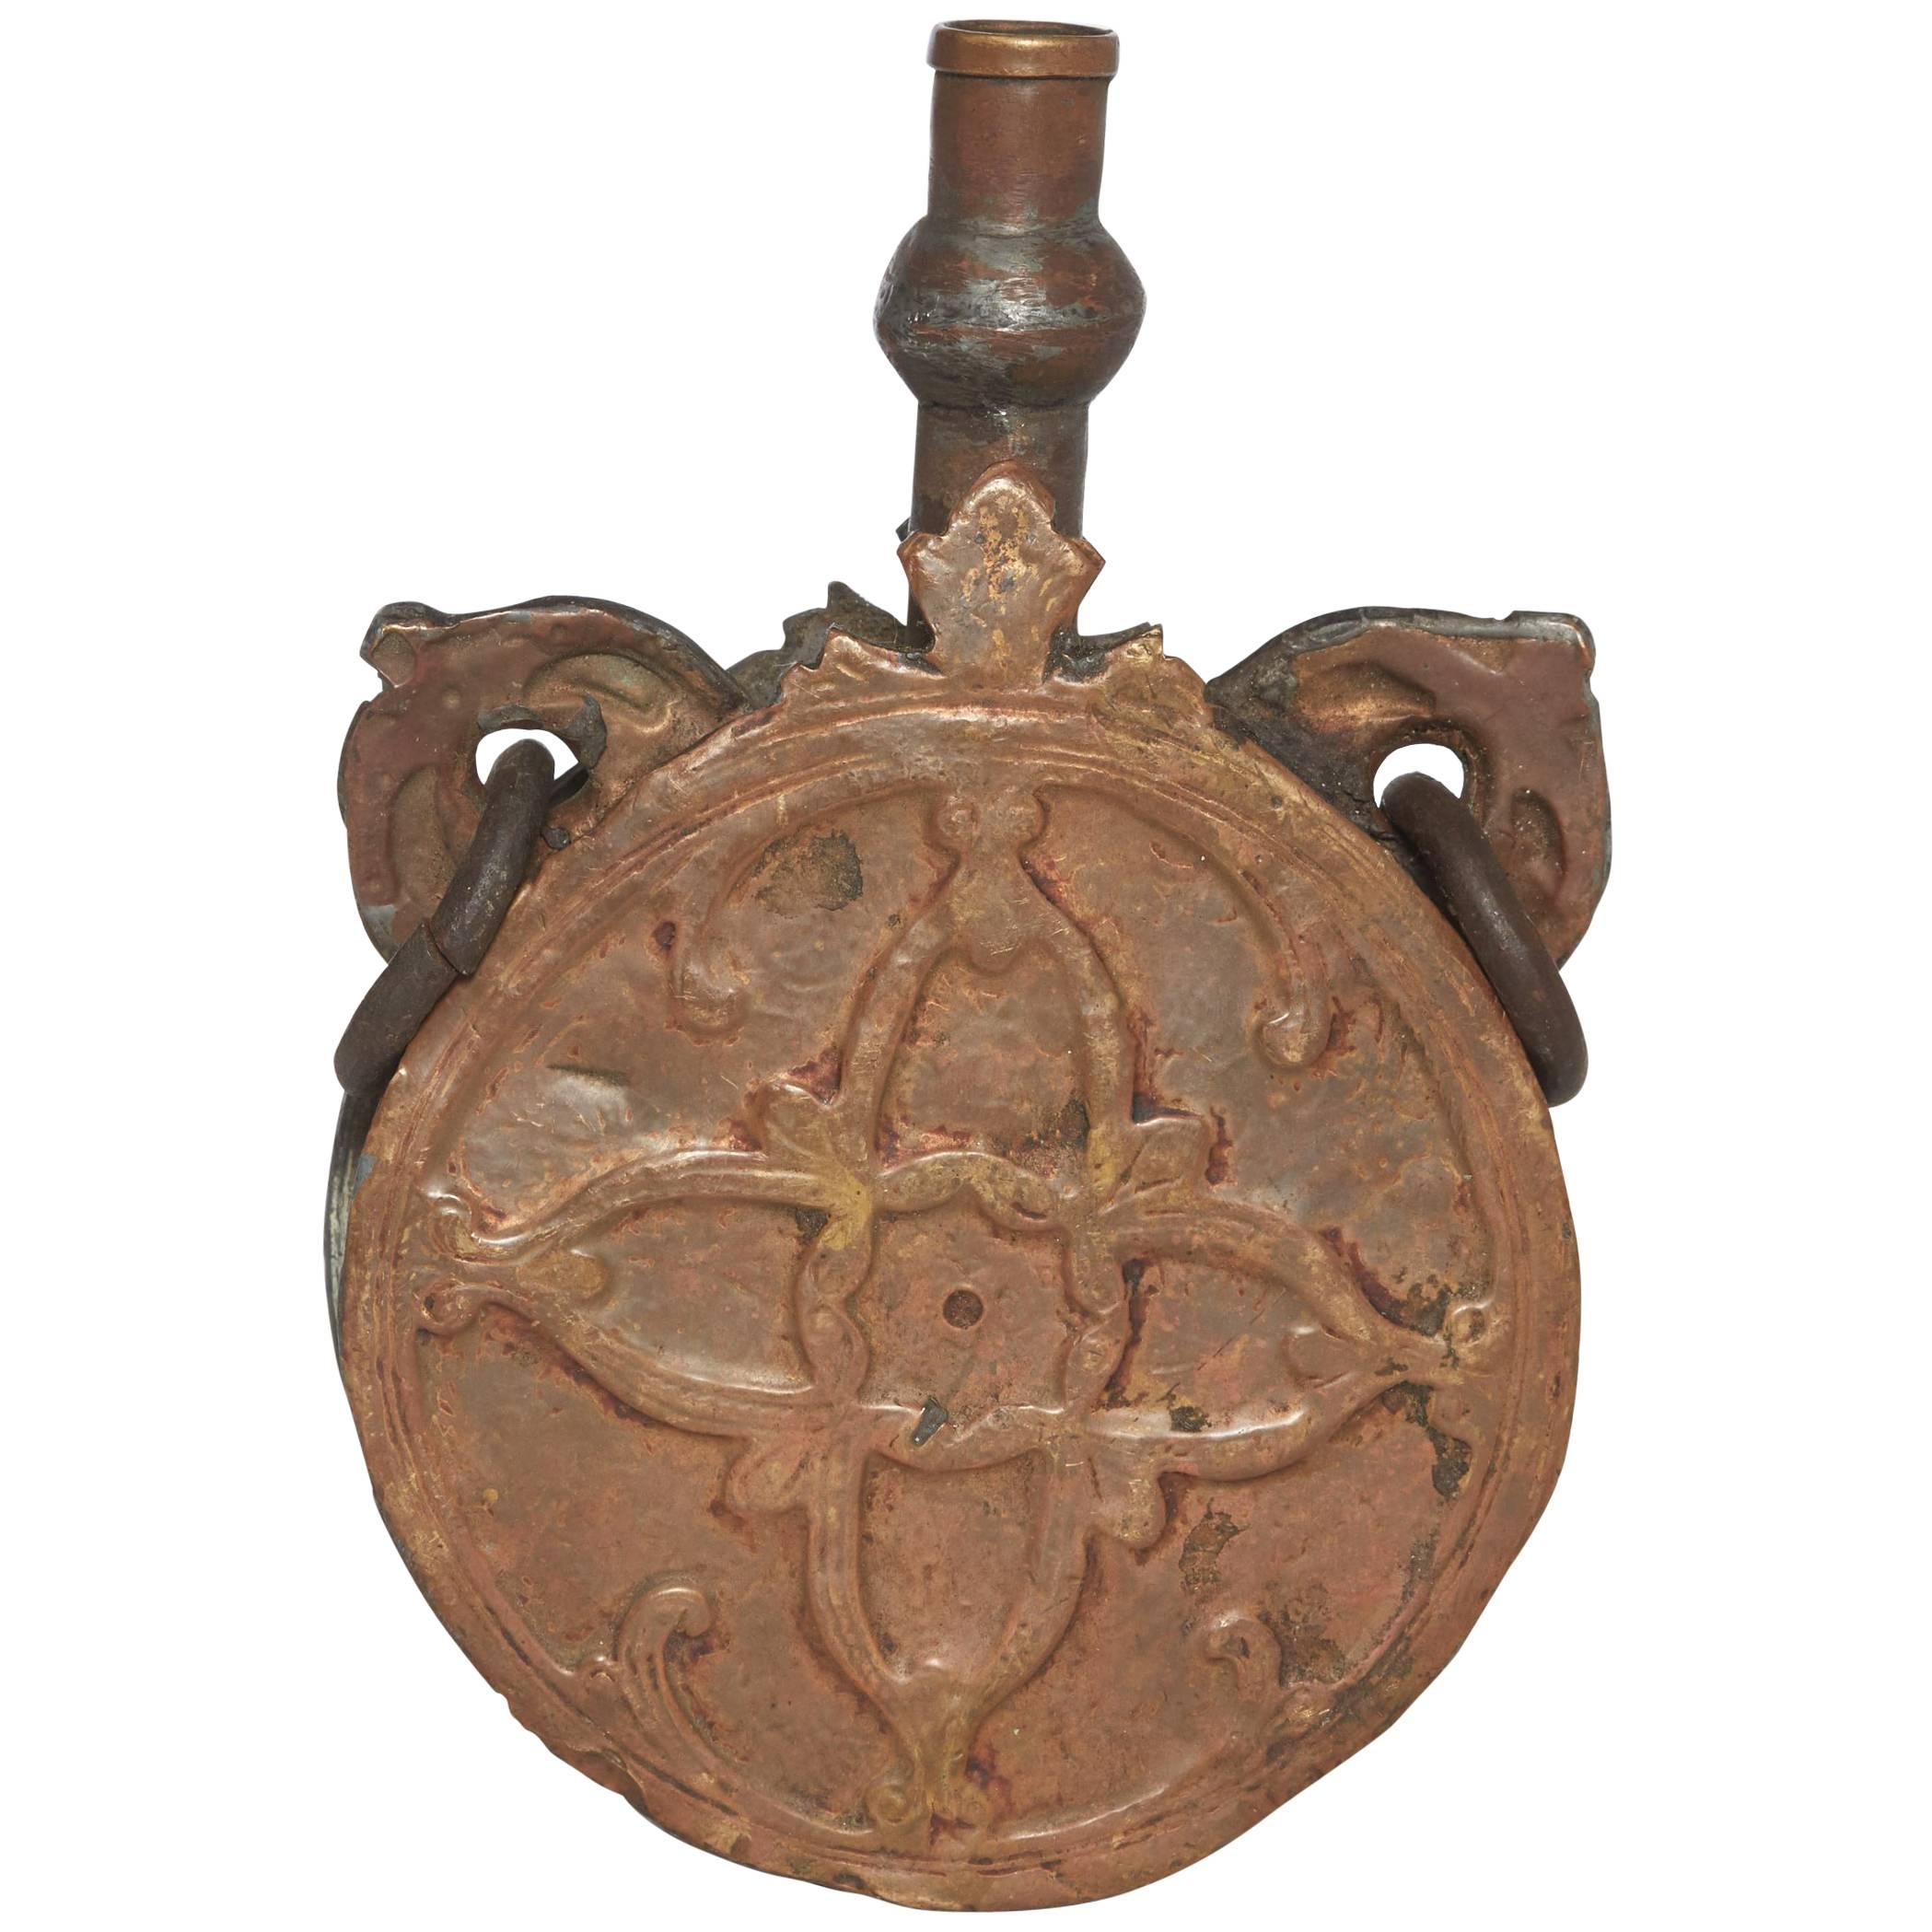 19th Century Turkish Bronze Vessel/Flask with Ornate Detailing